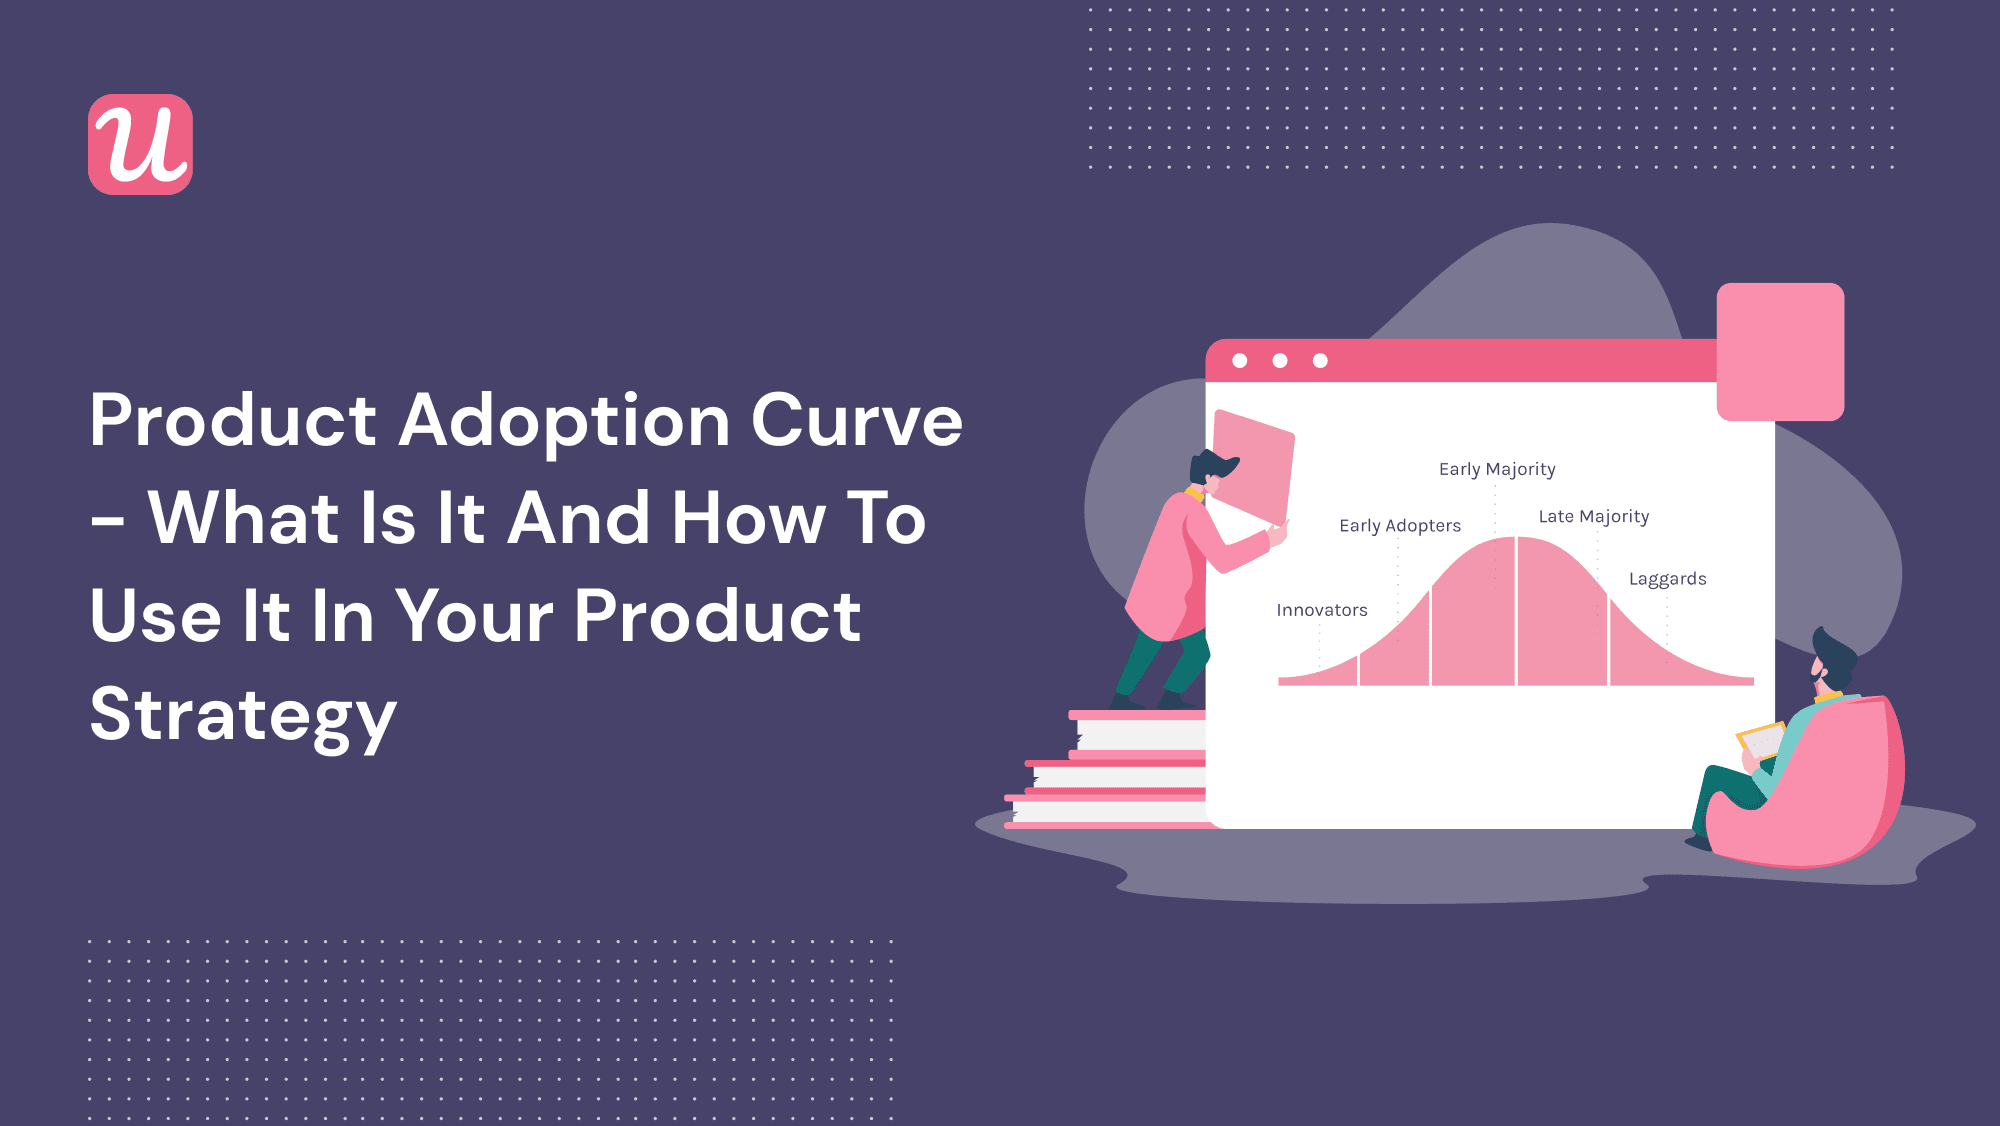 The Product Adoption Curve in SaaS: What Is It and How To Use It In Your Product Strategy